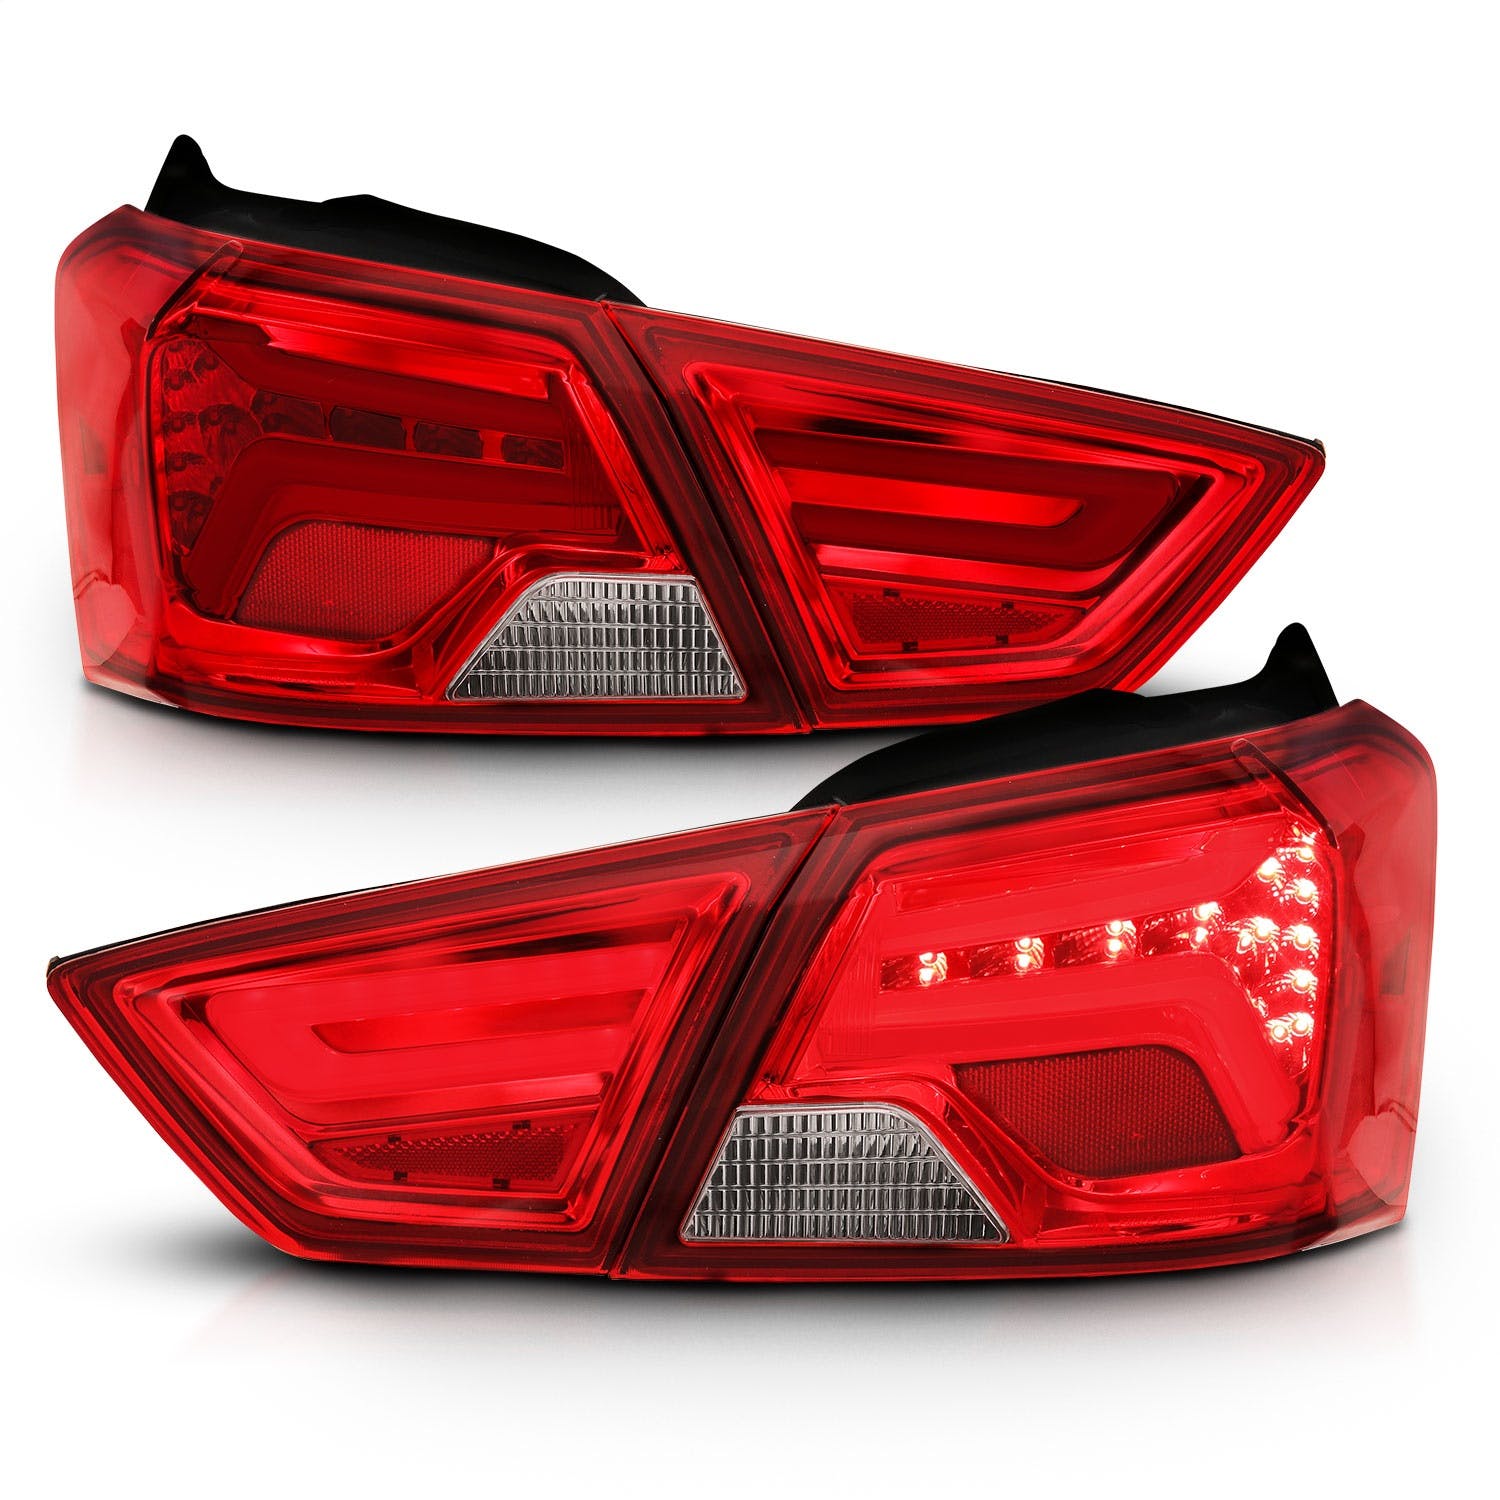 AnzoUSA 321346 LED Taillights Red/Clear